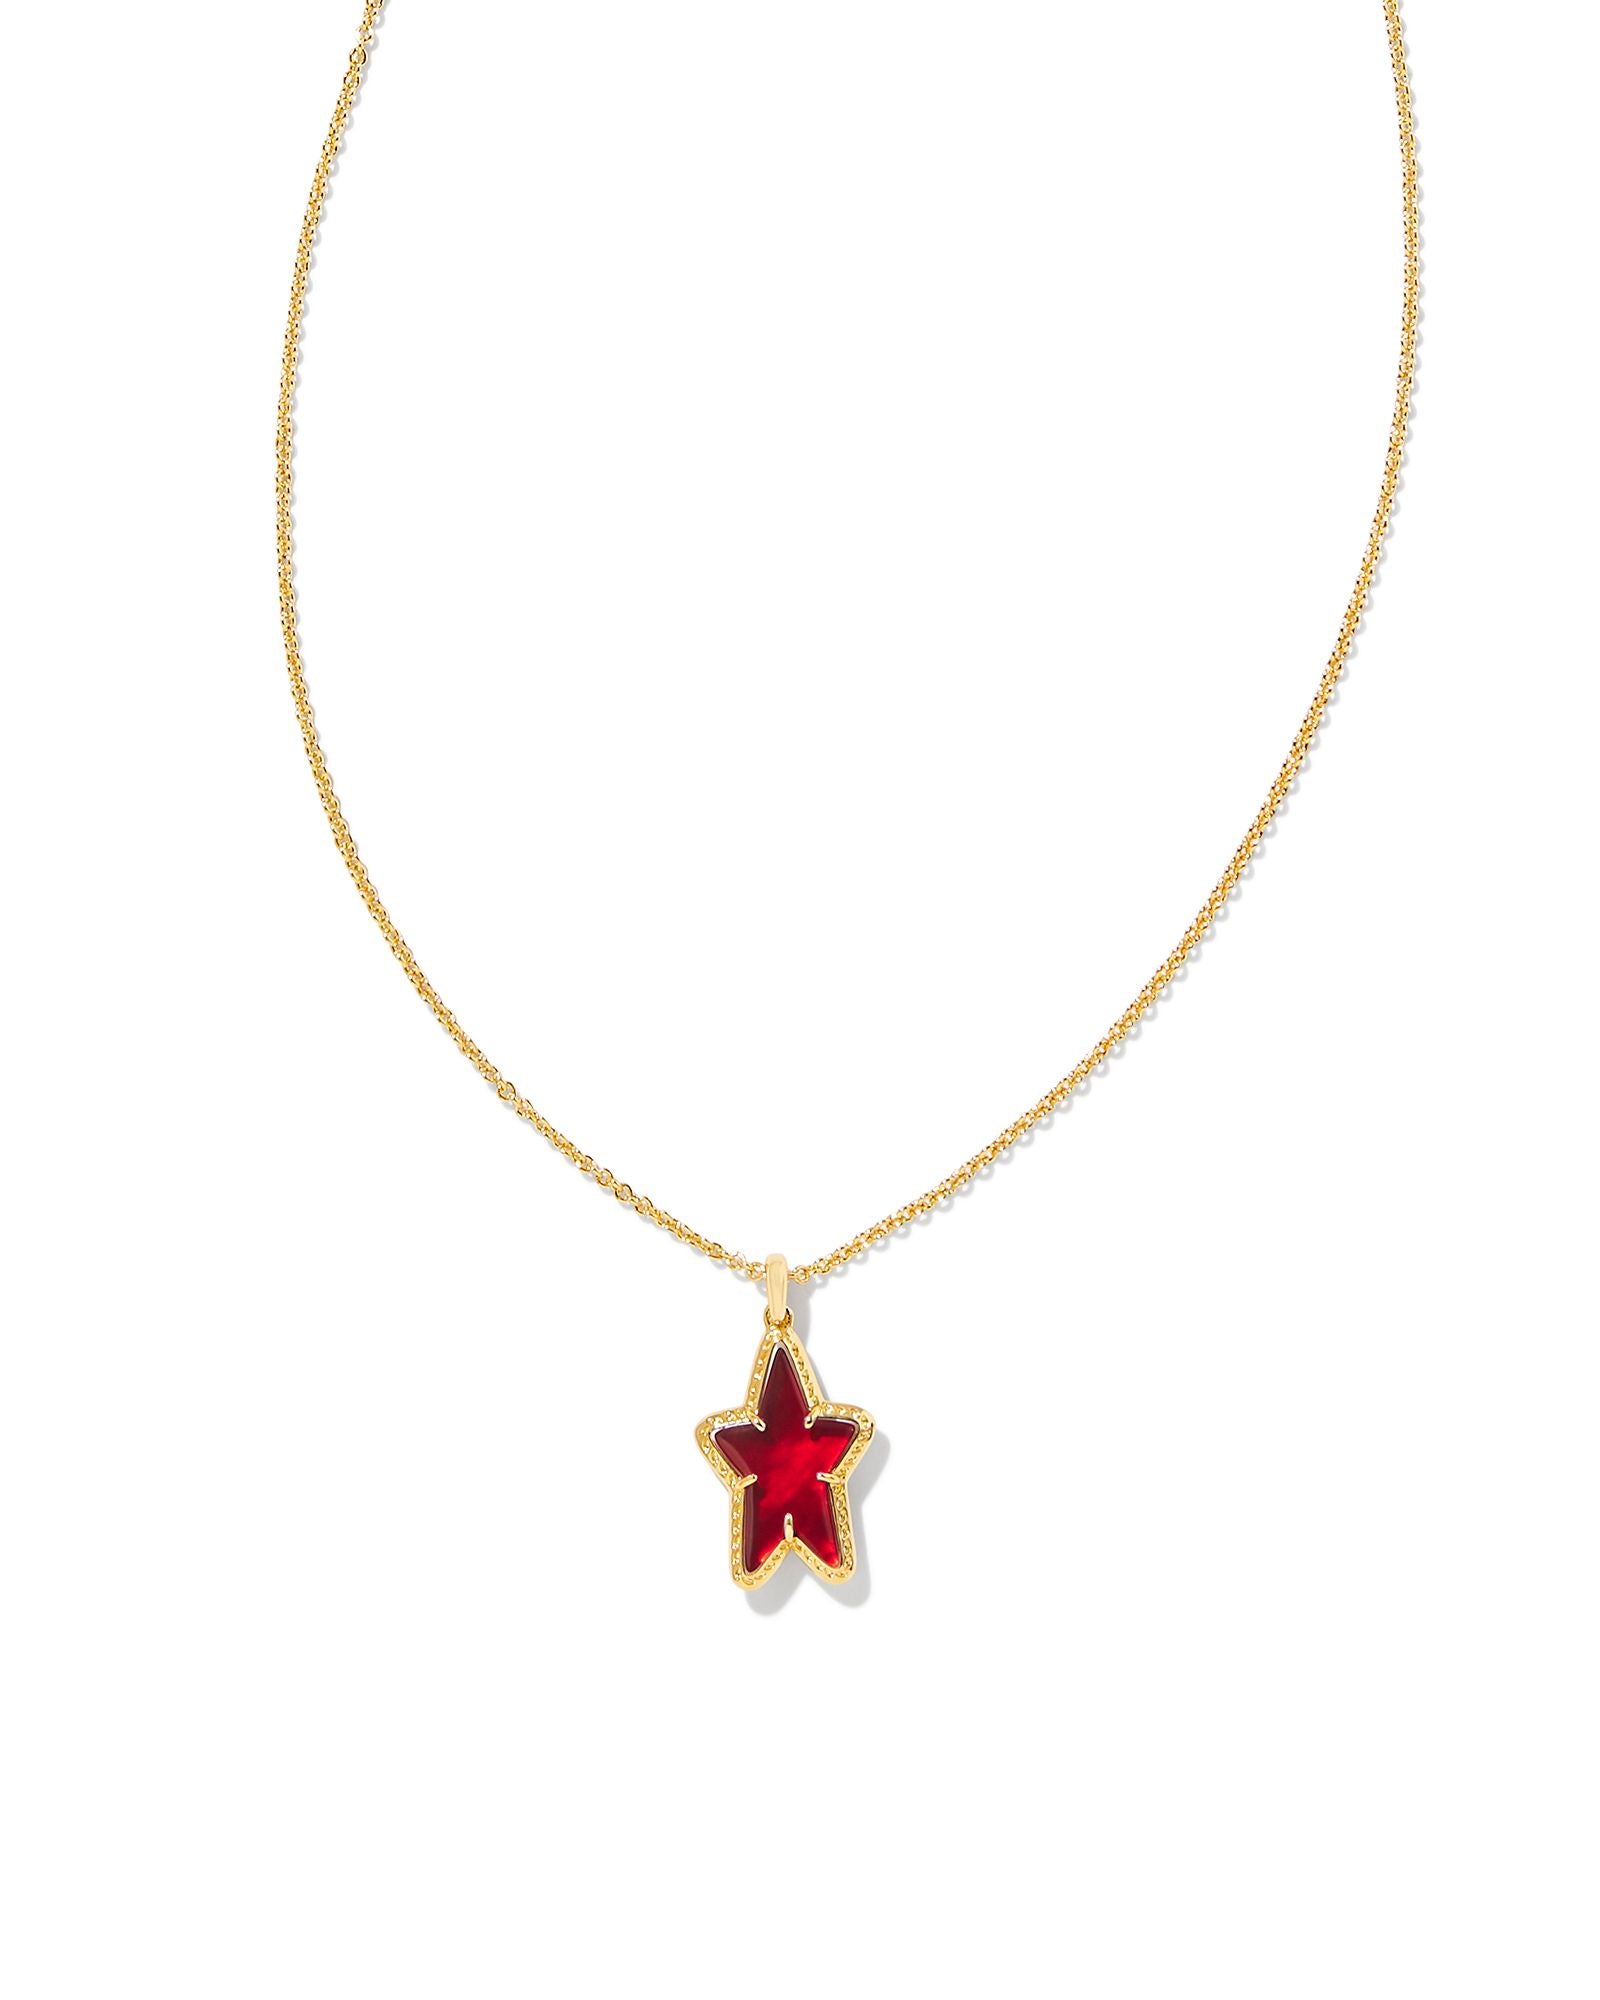 Ada Star Short Pendant Necklace in Gold Red llusion